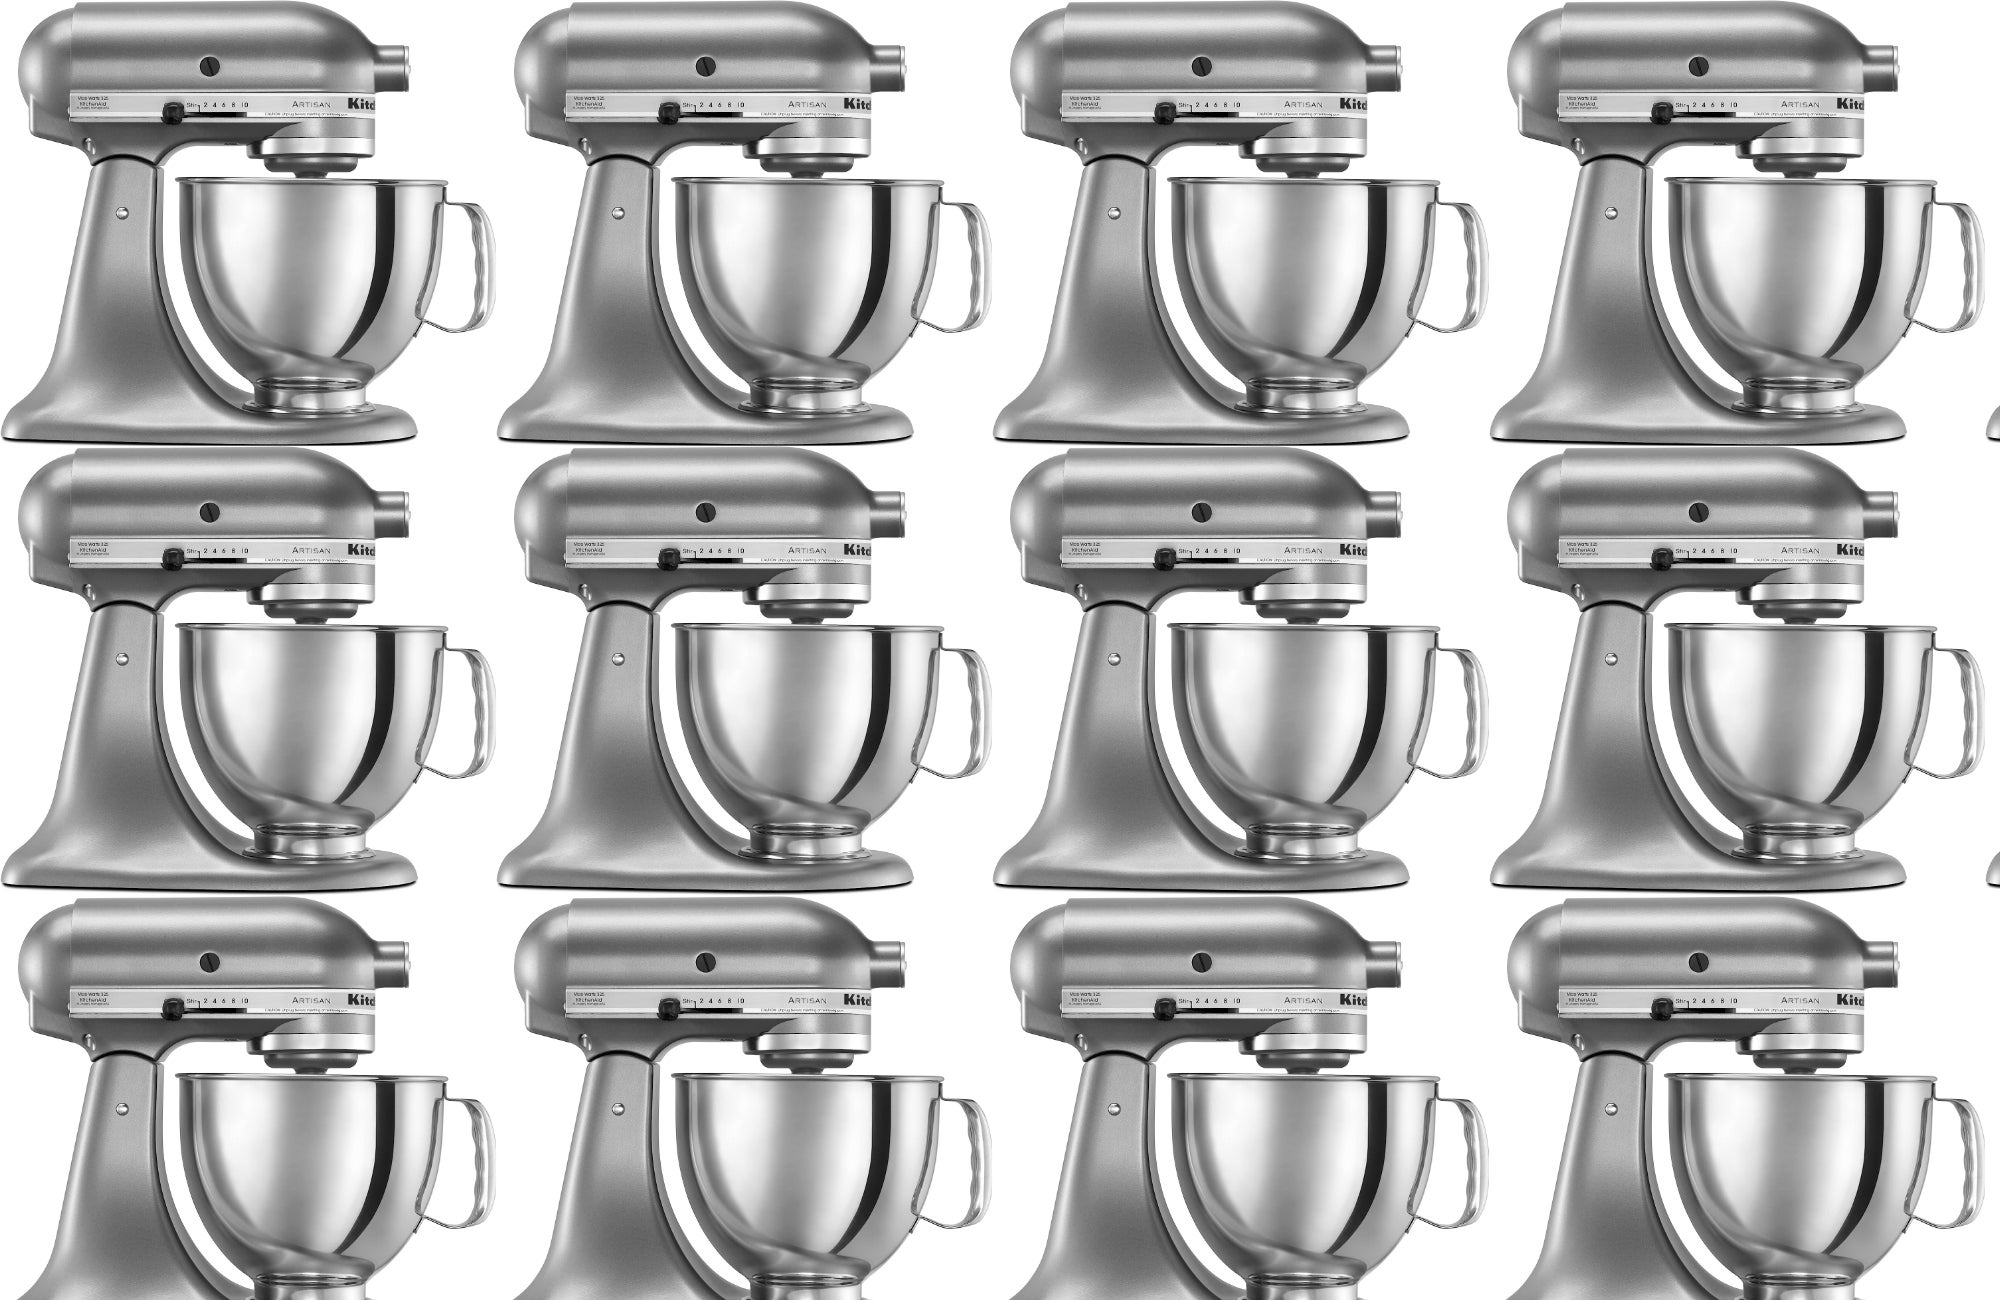 Save on KitchenAid stand mixers, Instant Pots, and more with Black